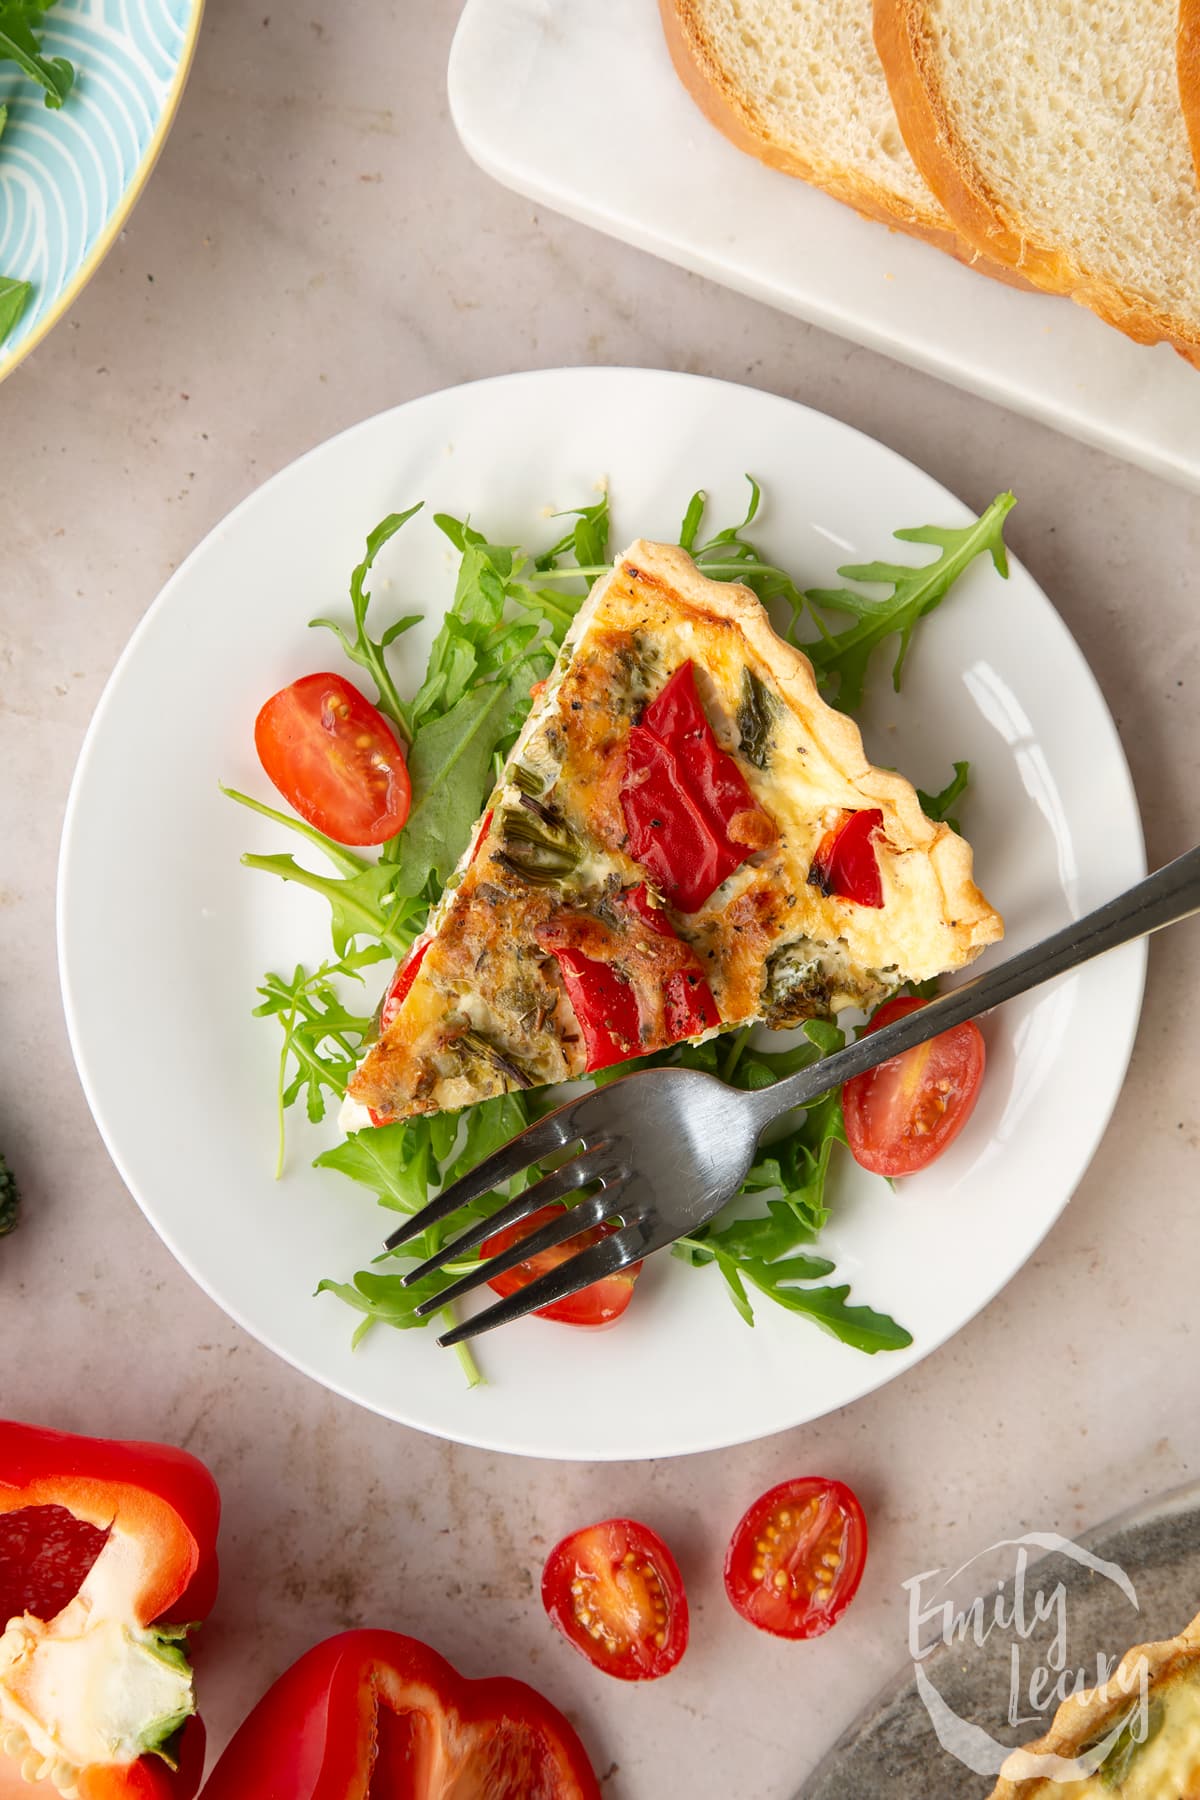 A slice of broccoli and pepper quiche served on a bed of salad with a fork on the side.